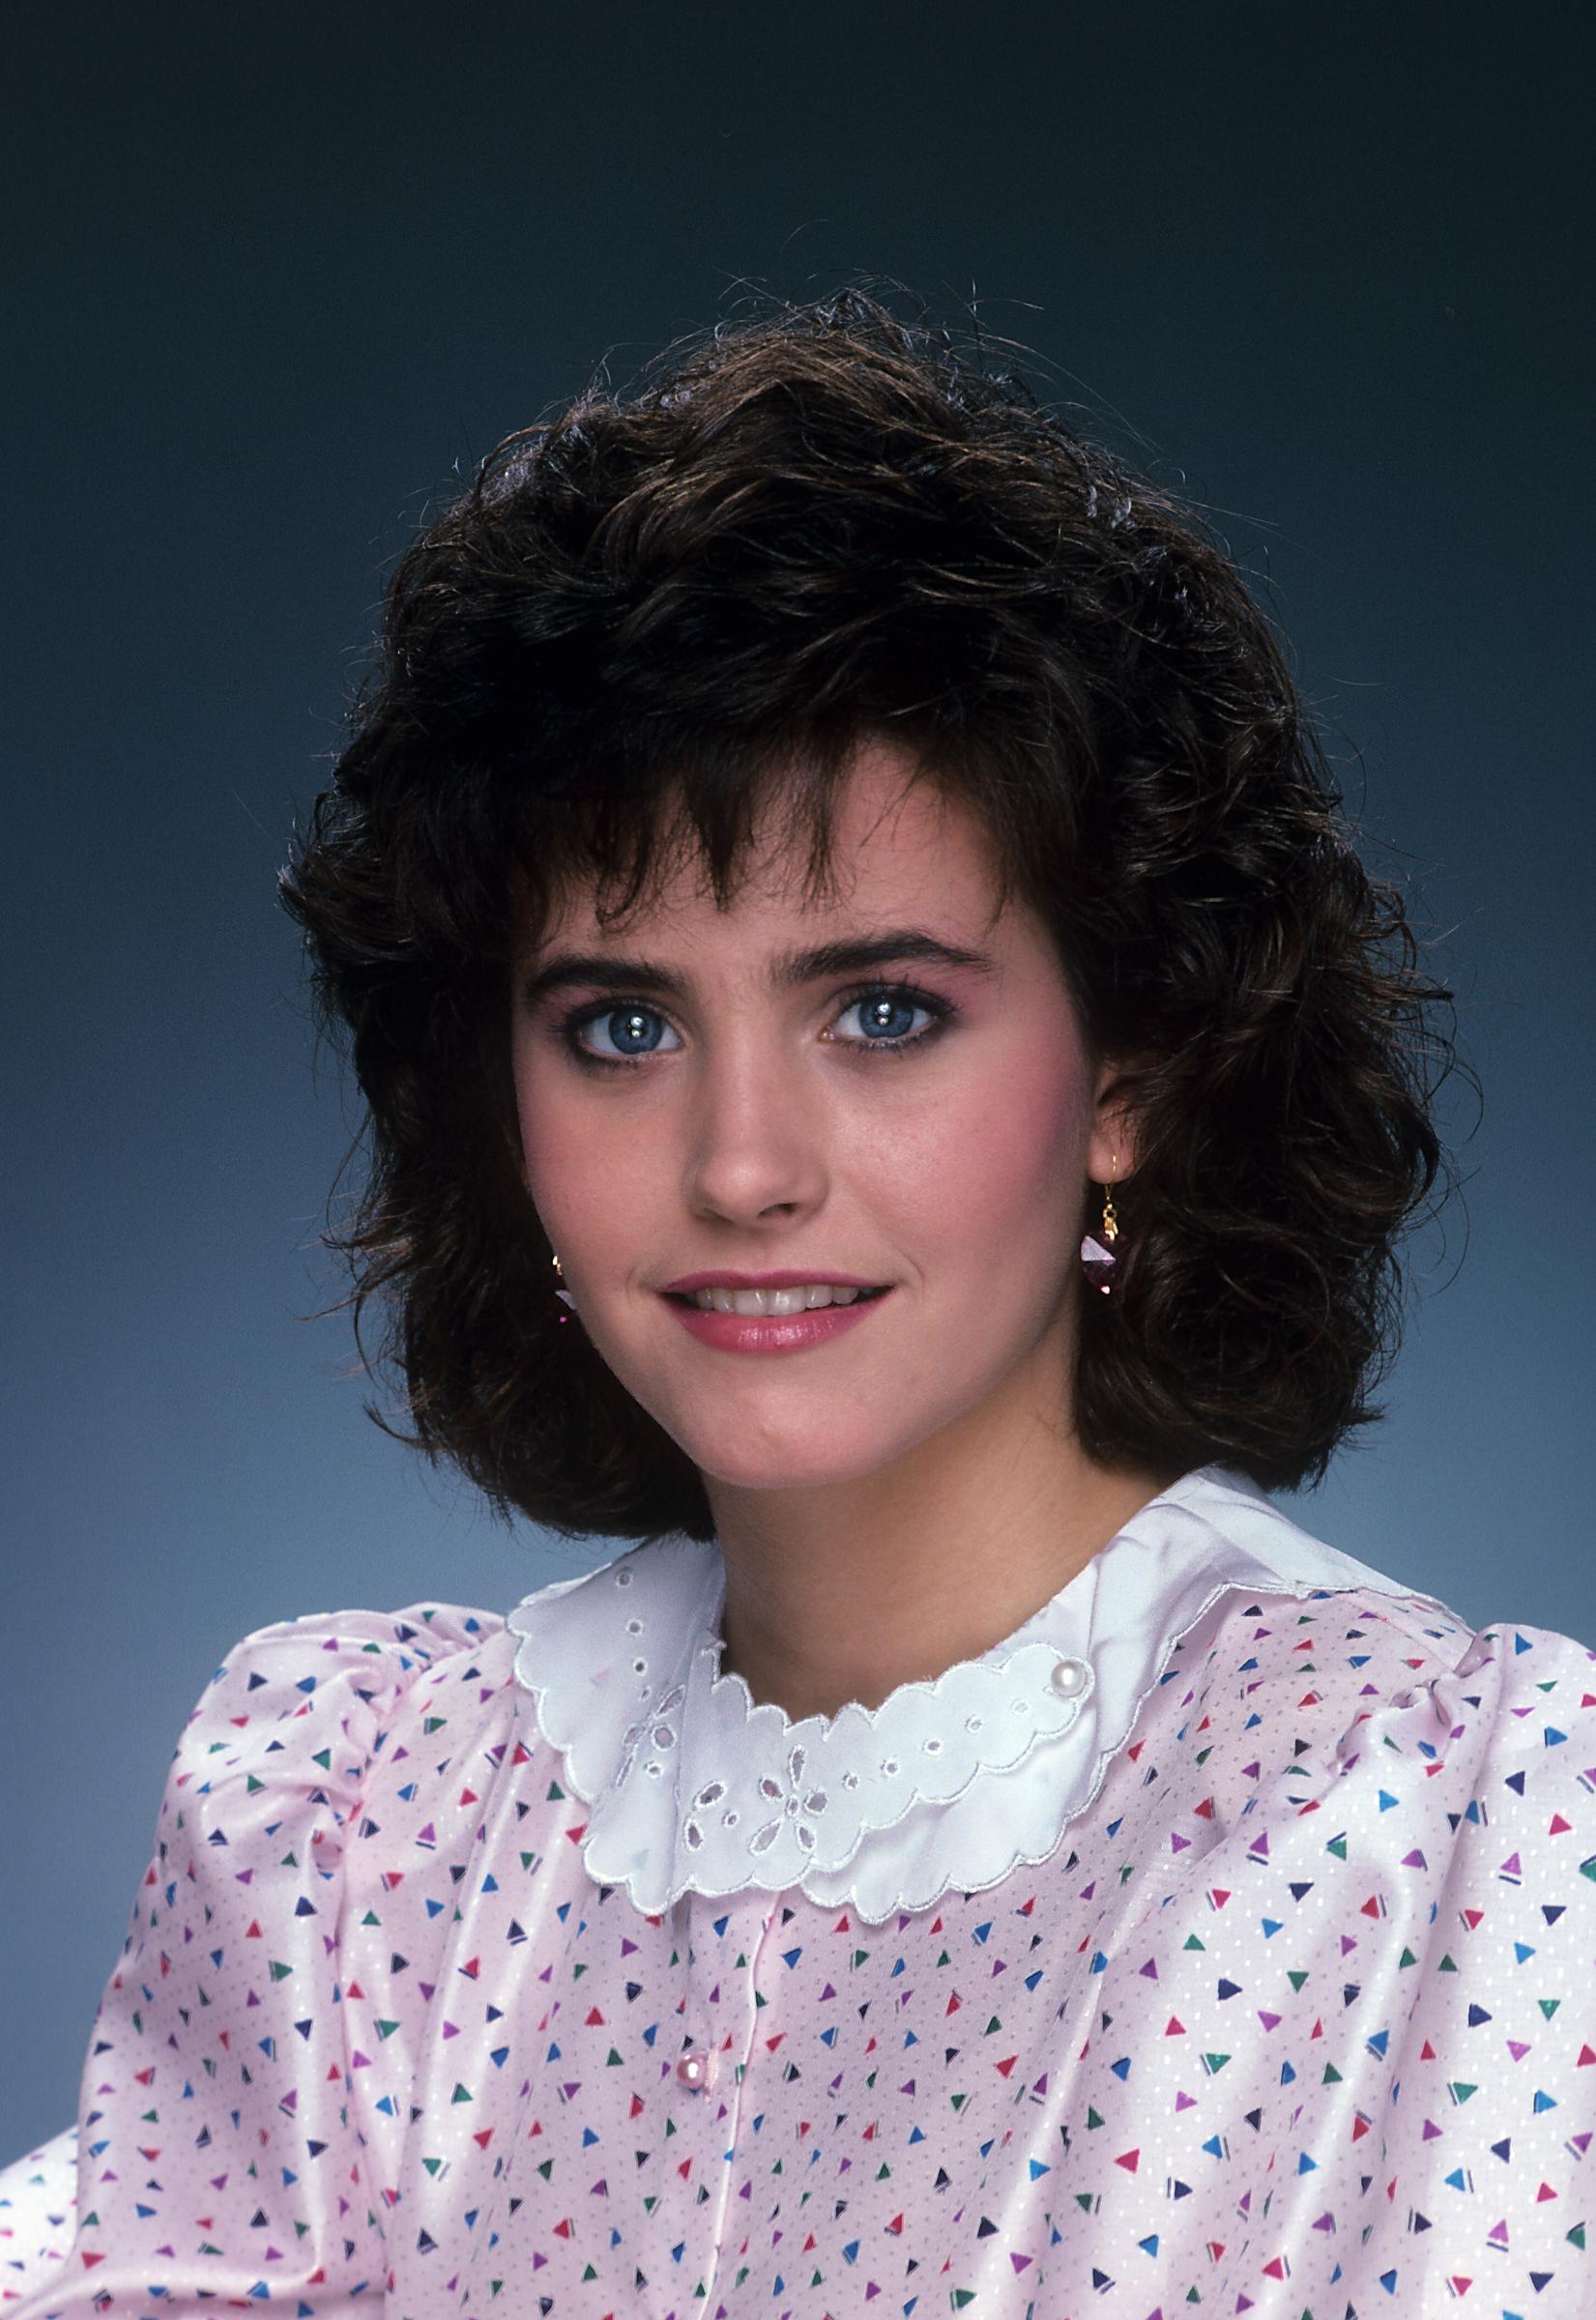 Courteney Cox vers 1983. | Source : Getty Images